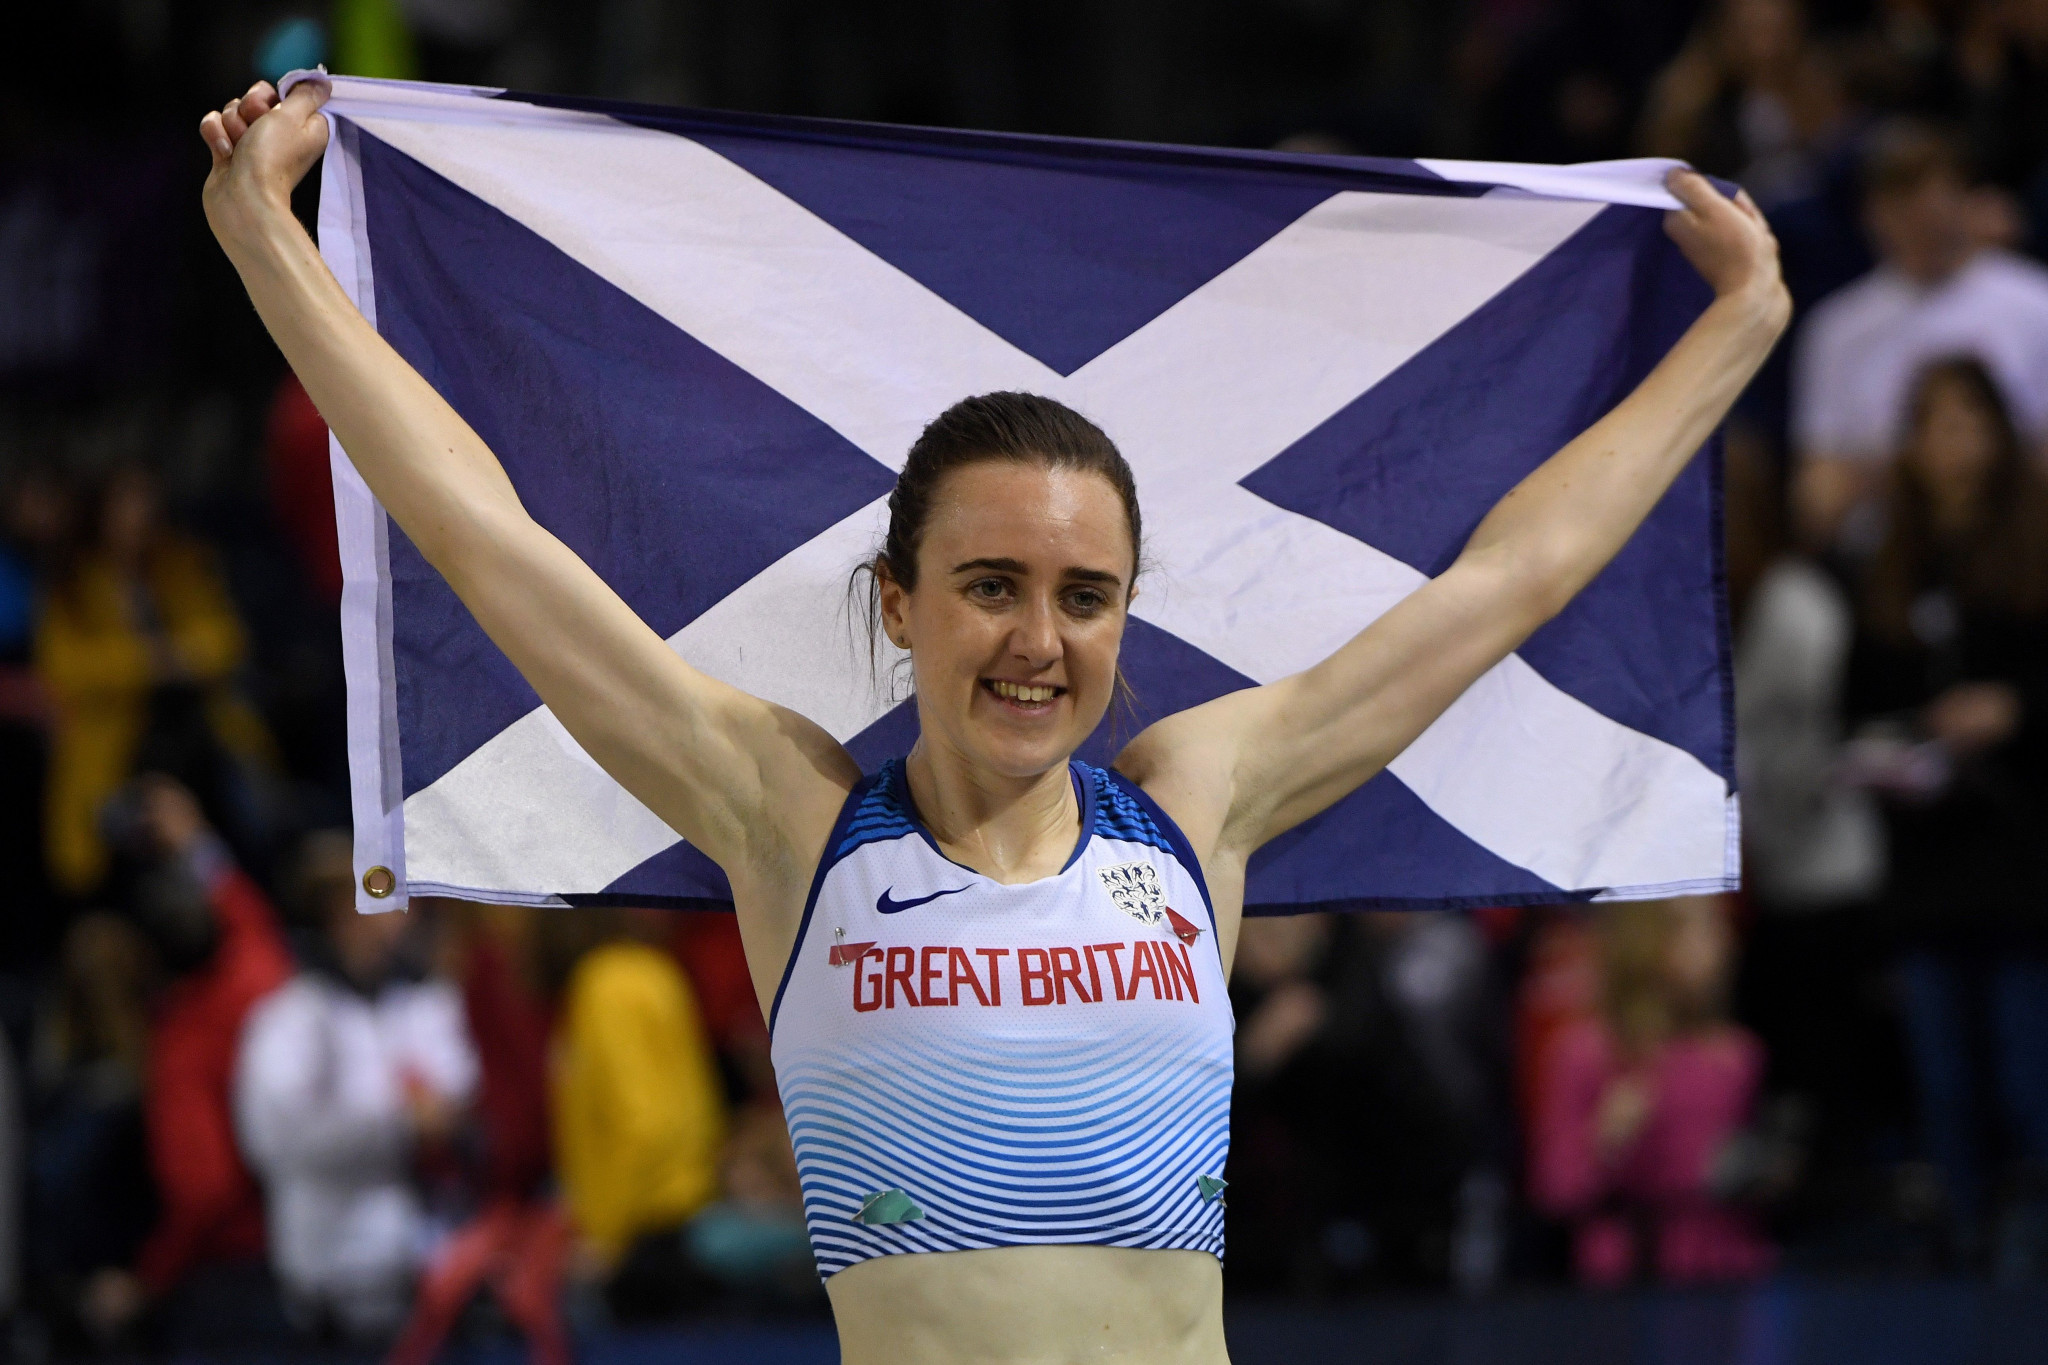 Laura Muir is one of Scotland's best hopes of an athletics gold at Birmingham 2022 ©Getty Images